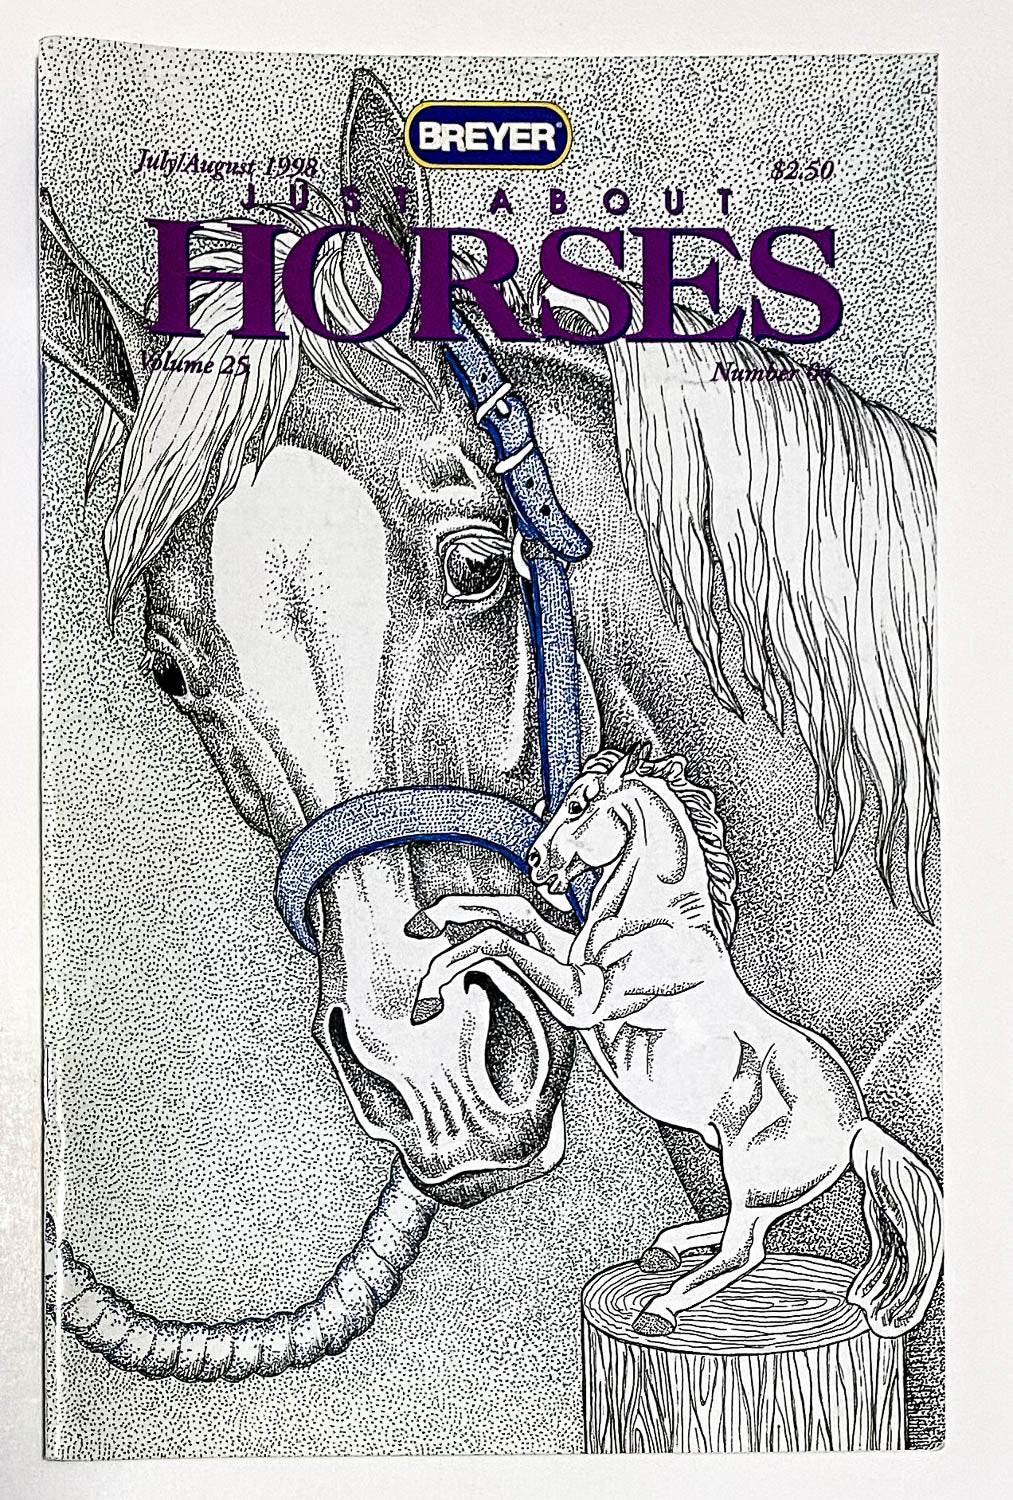 Just About Horses Magazine Vol. 25 No. 4, 1998 July/Aug